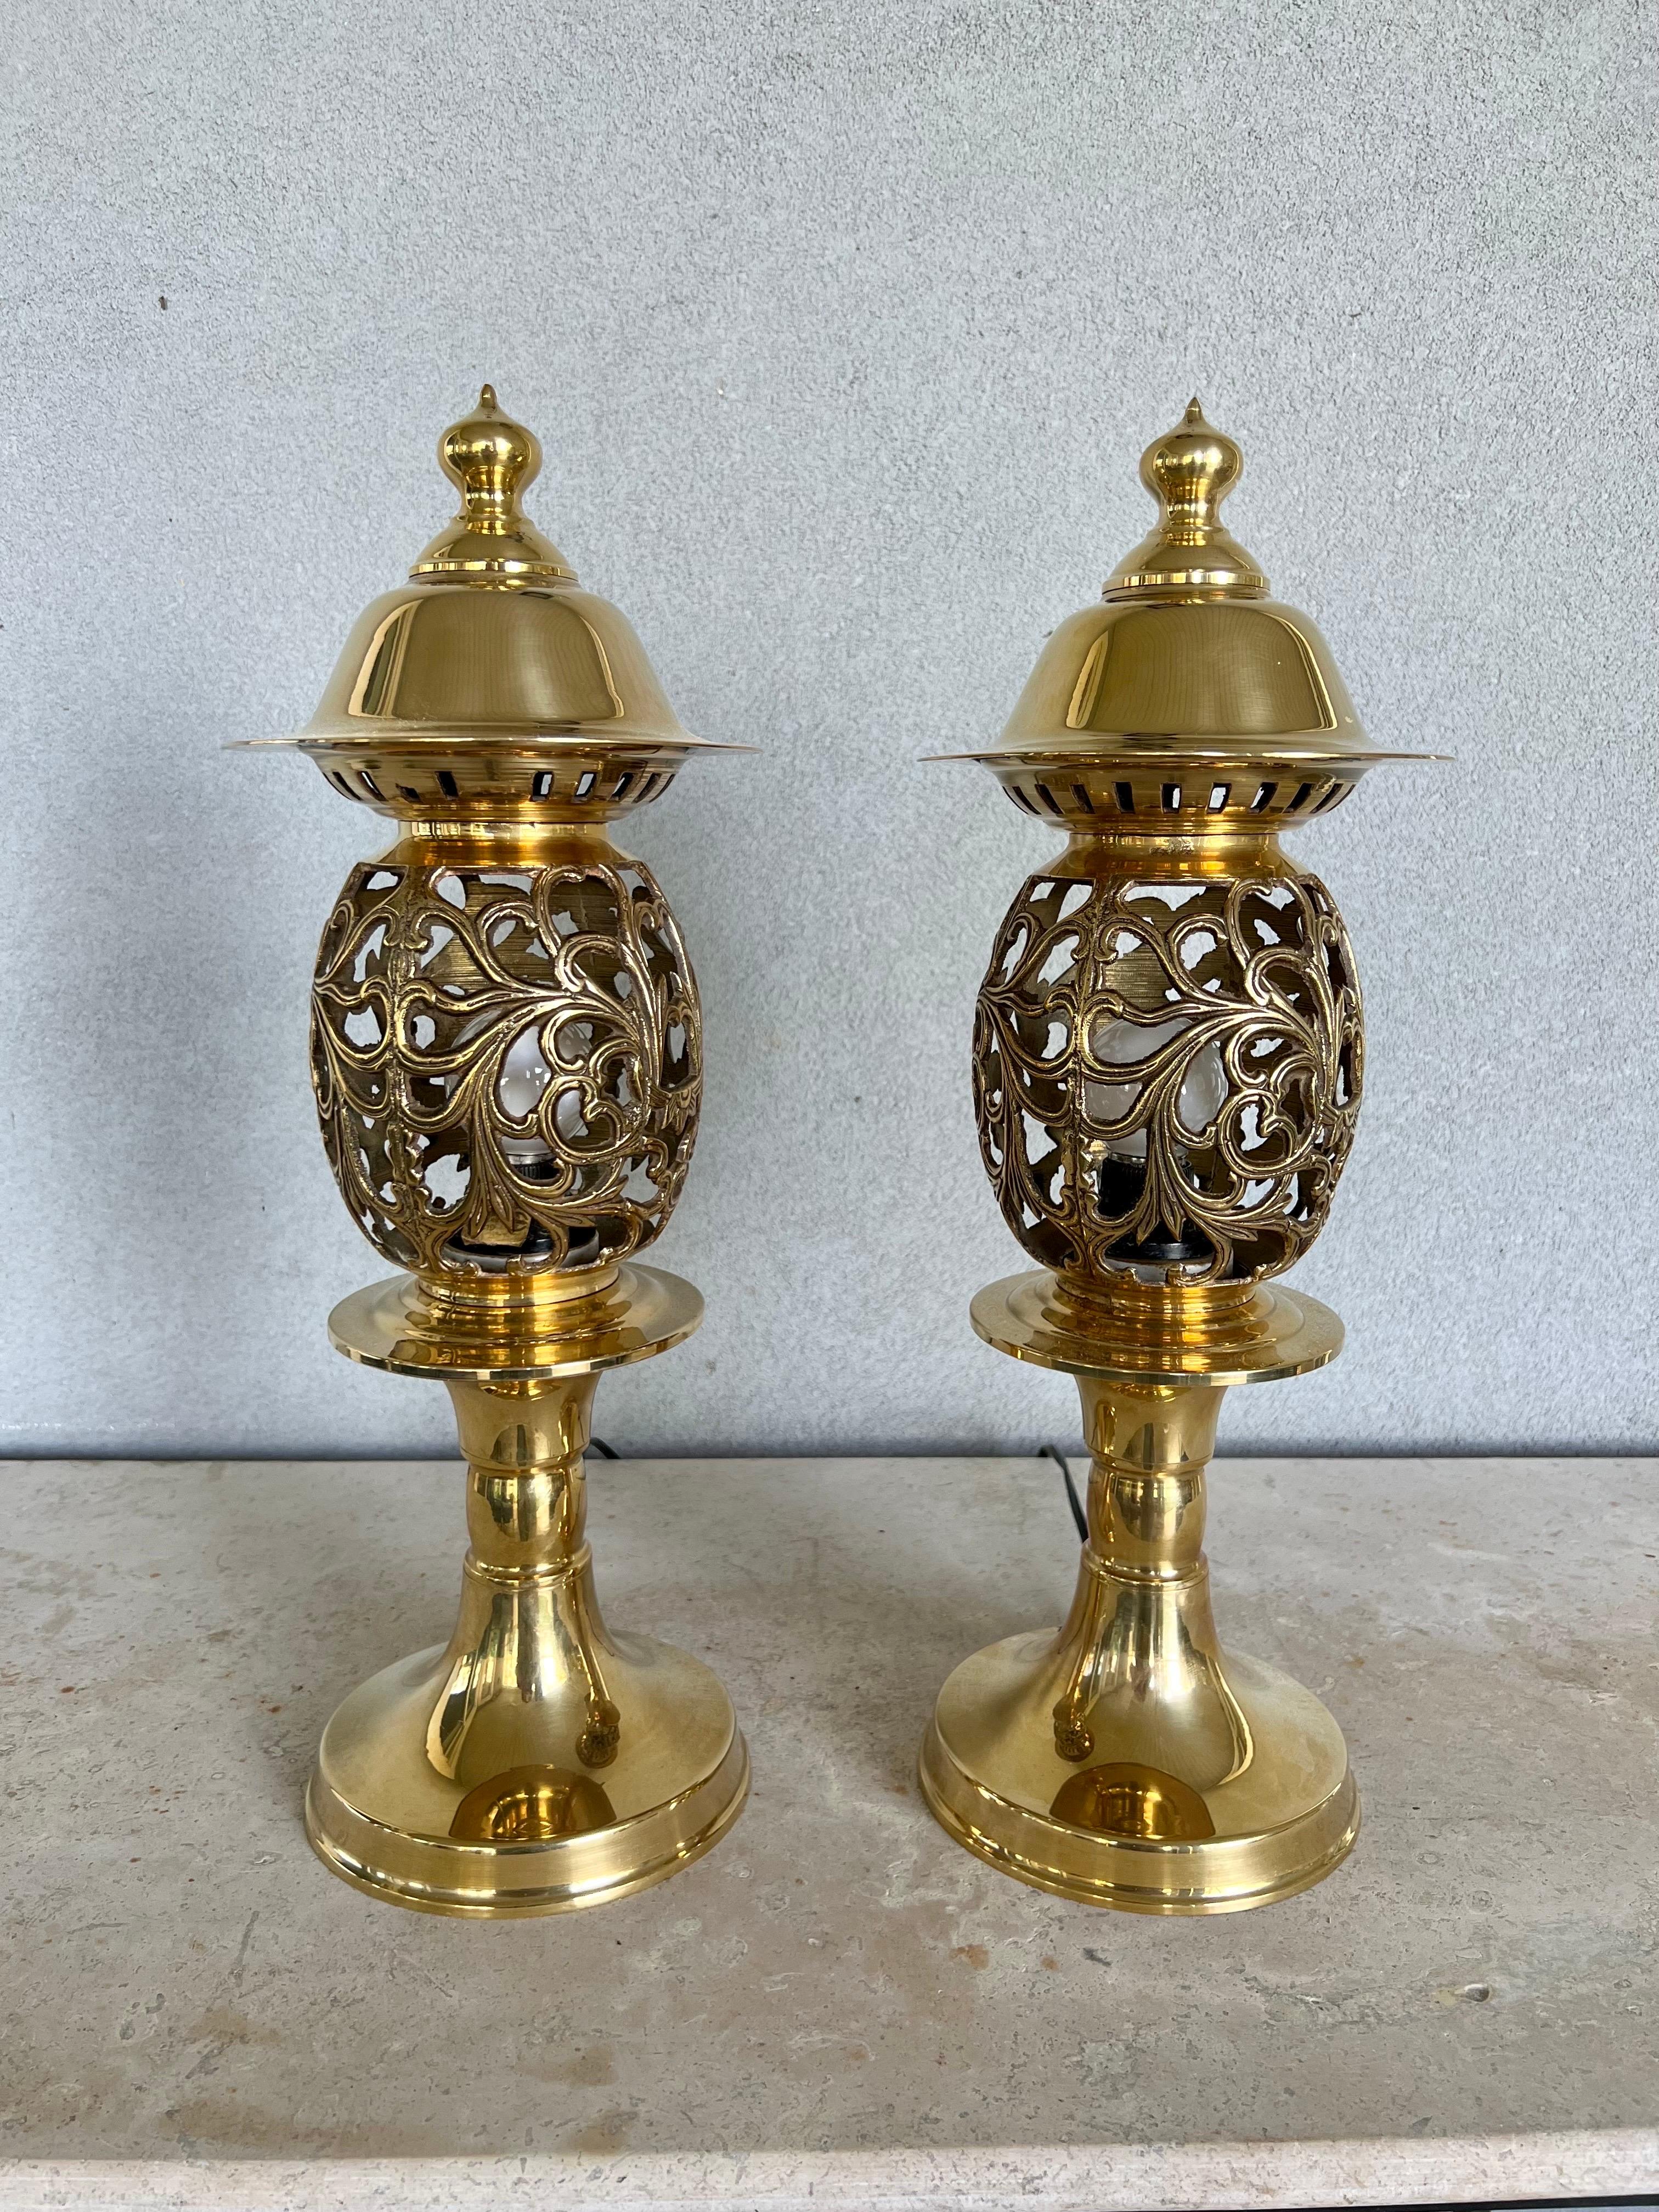 Enhance your living space with these exquisite solid brass Moroccan scroll table lamps. Crafted with precision, each lamp showcases an elaborate scrollwork design that is both intricate and airy, allowing for a play of light and shadow that will add